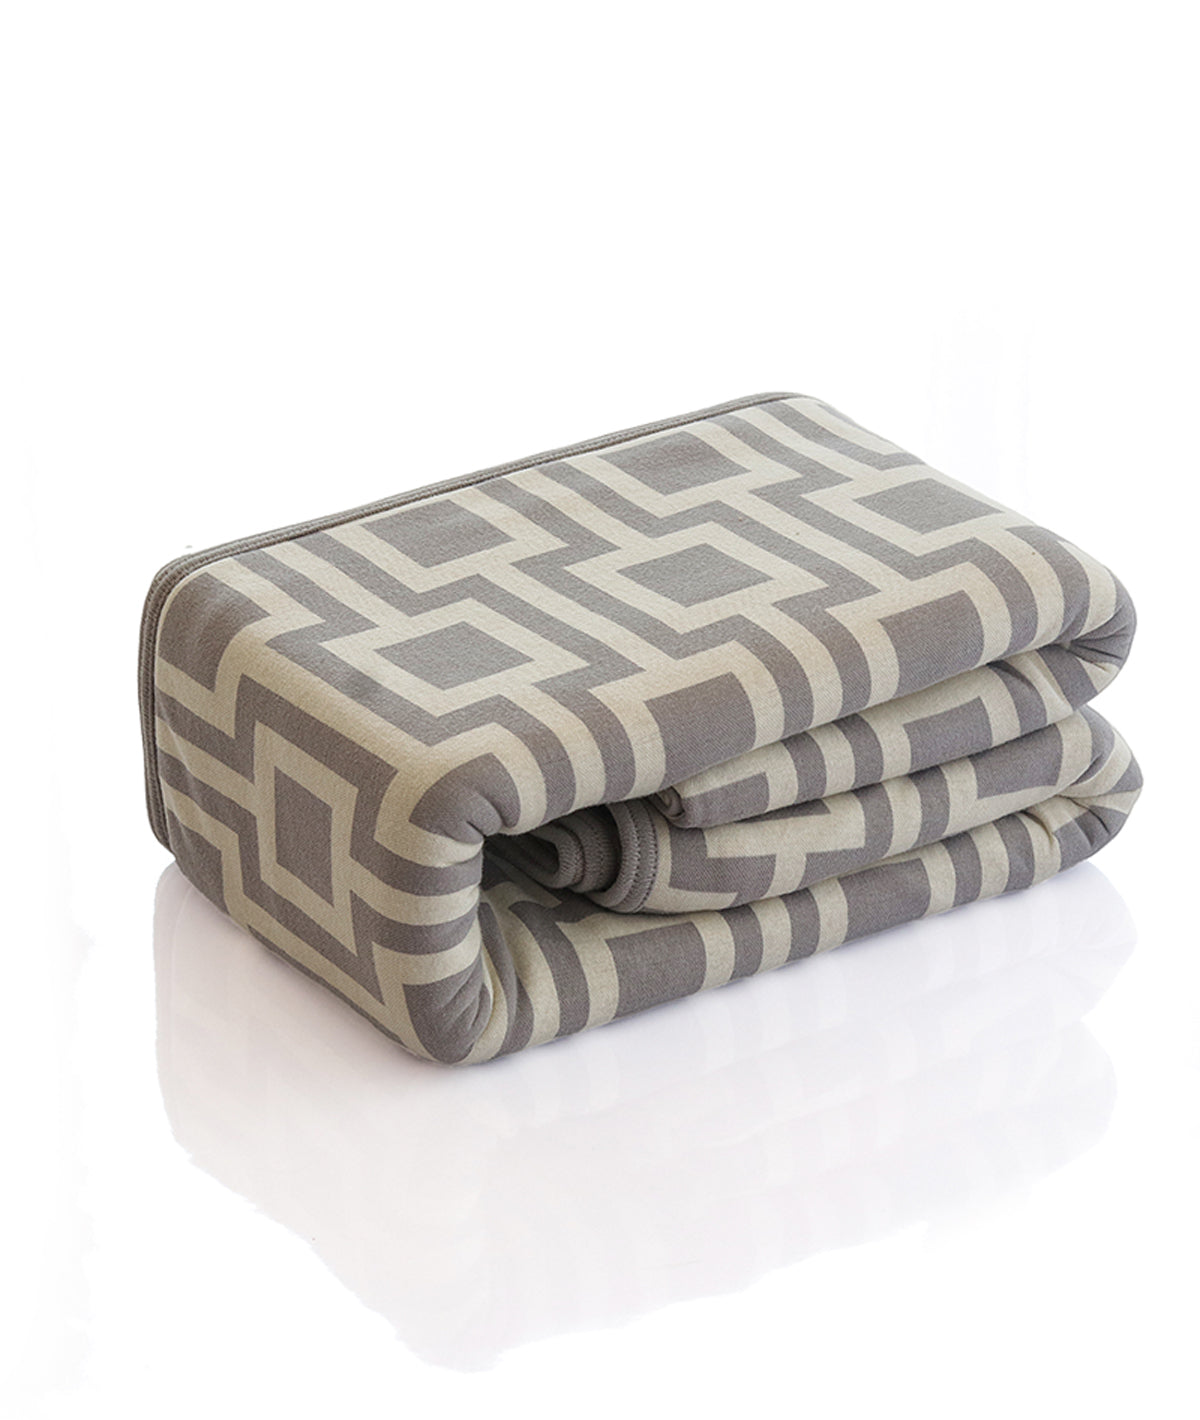 Box In Box Cotton Knitted Double Bed AC Blanket / Dohar For Round The Year Use  (Light Grey & Natural)